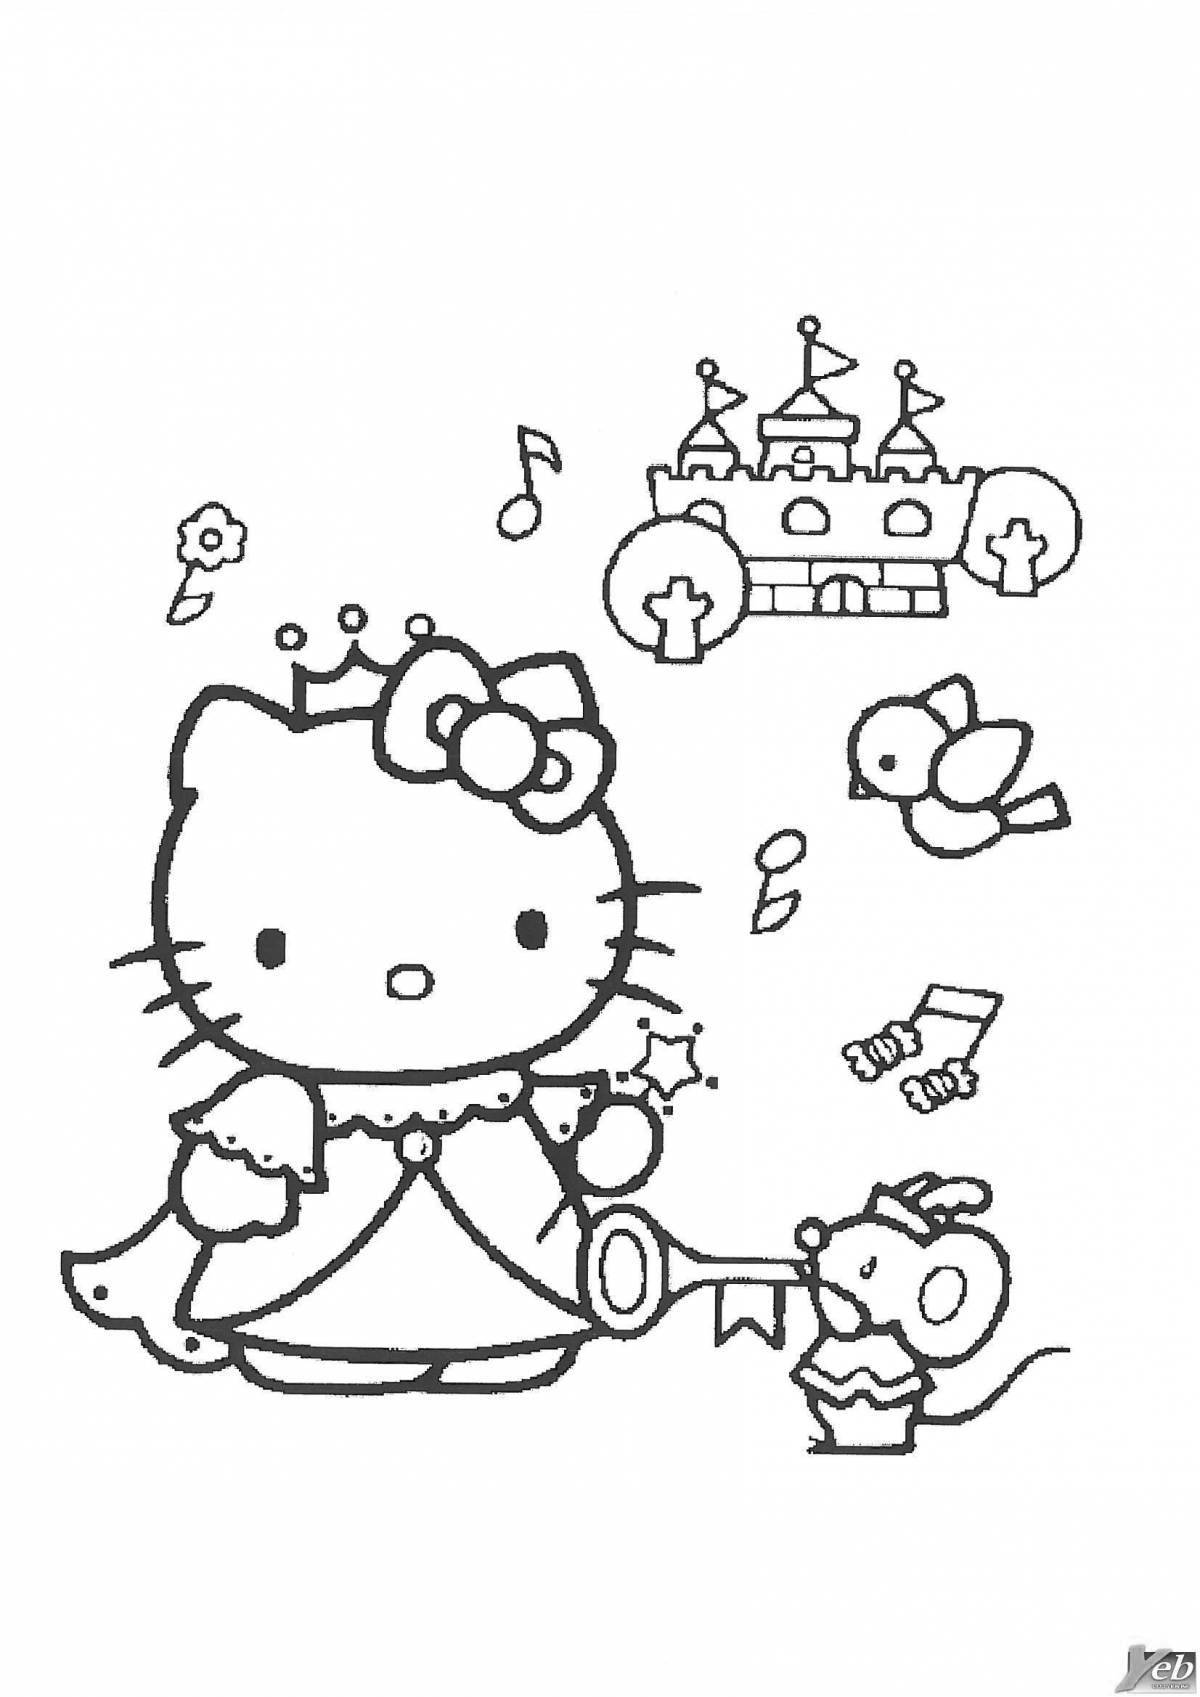 Hypnotic hello kitty punk coloring book